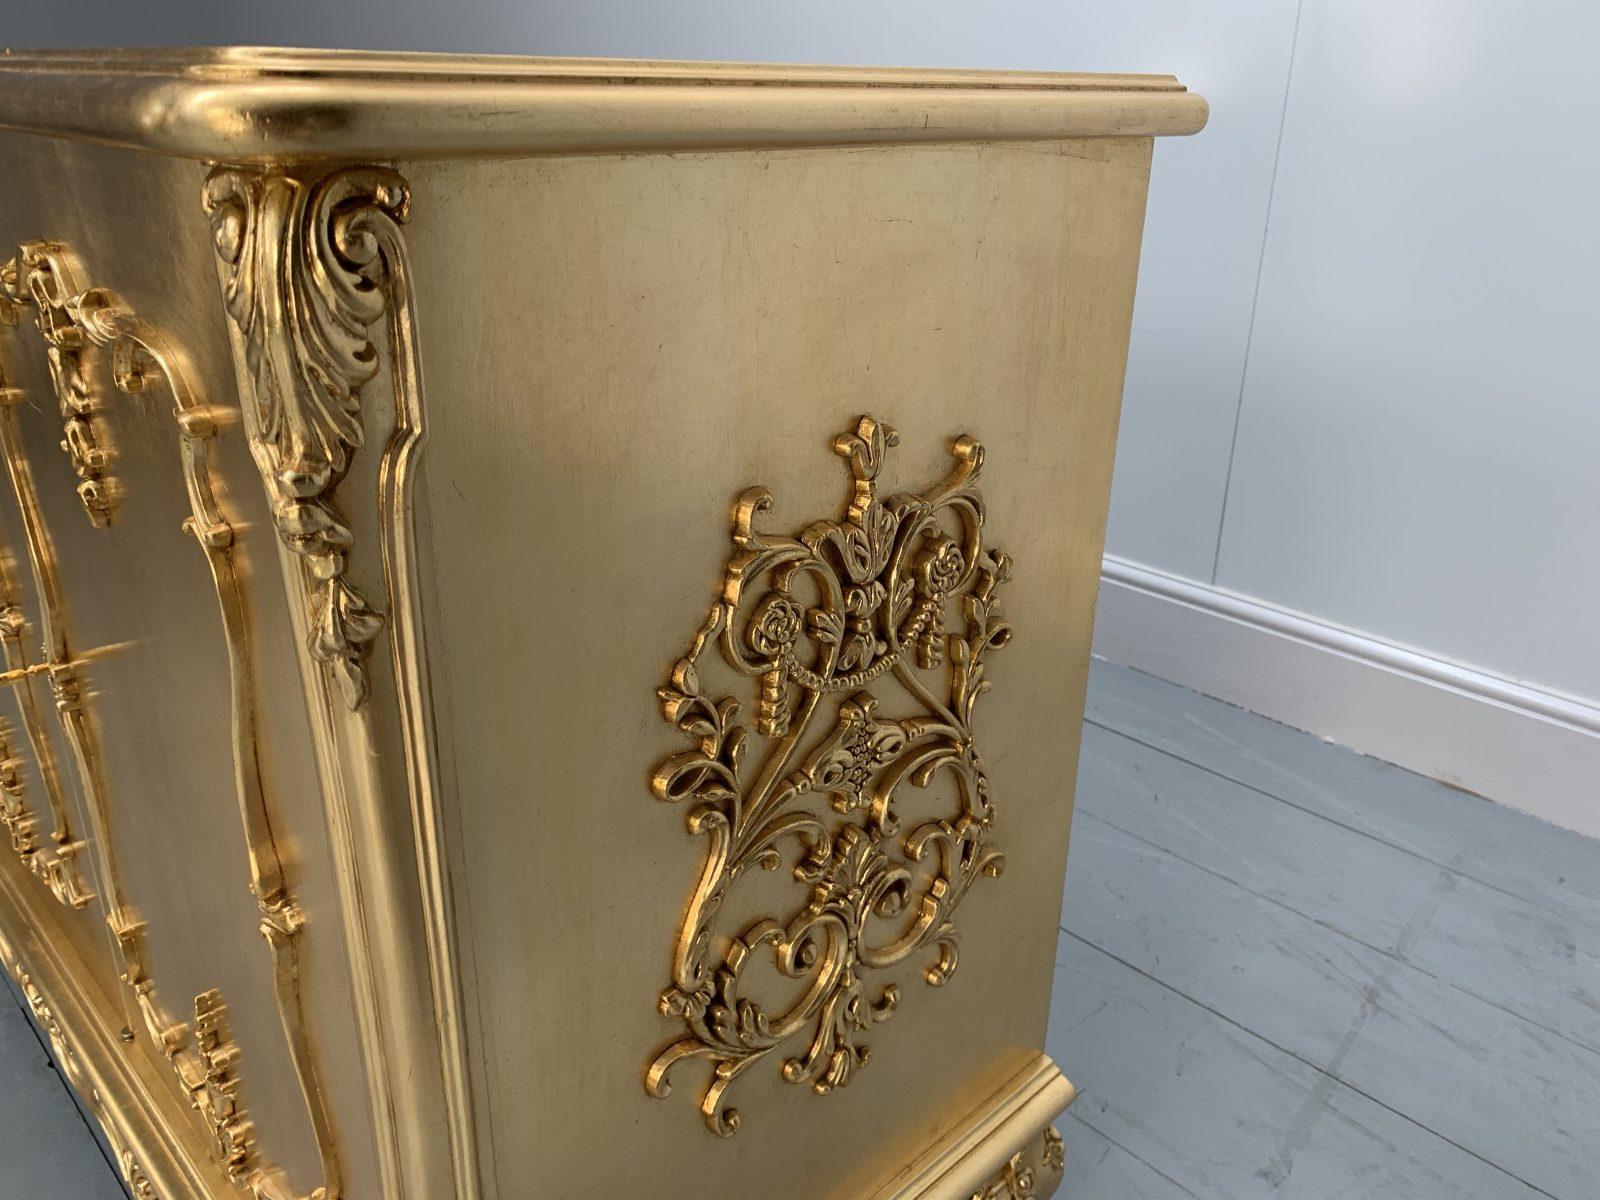 Asnaghi Cabinet Commode Console Sideboard in Gilt Gold In Good Condition For Sale In Barrowford, GB